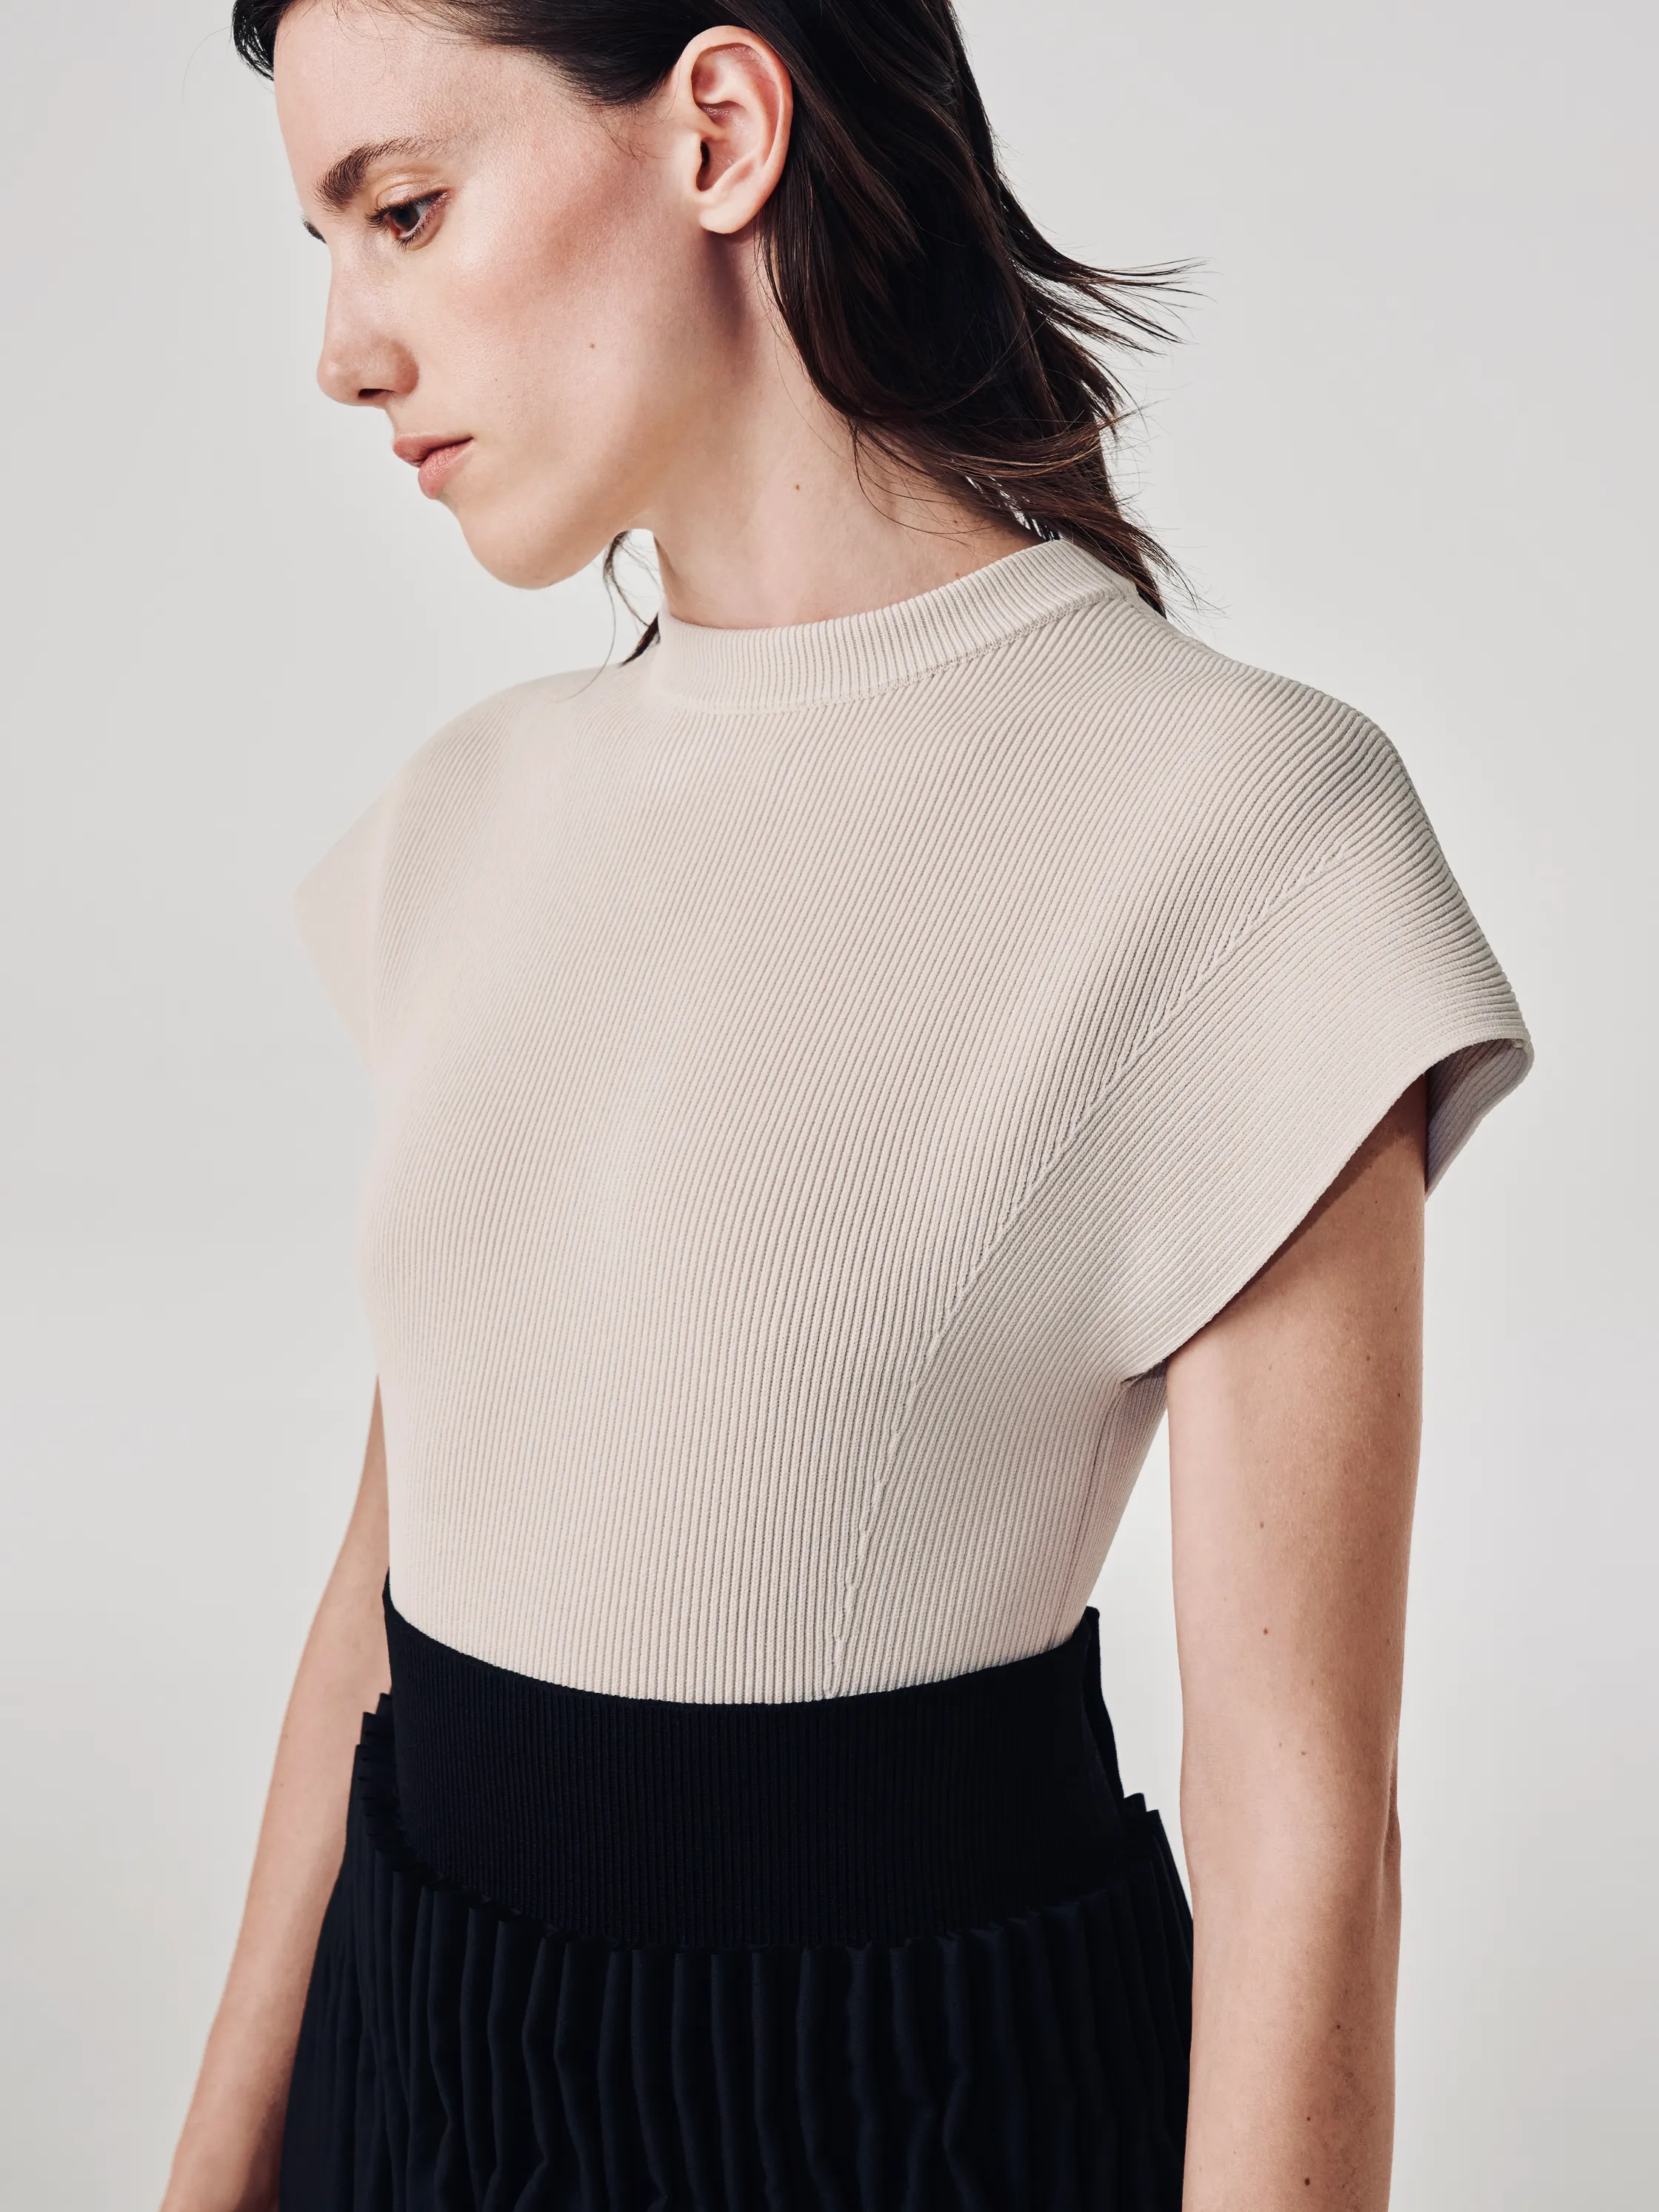 At FFORME, a New Womenswear Label 
Inspired by Architectural Shapes
09/08/22